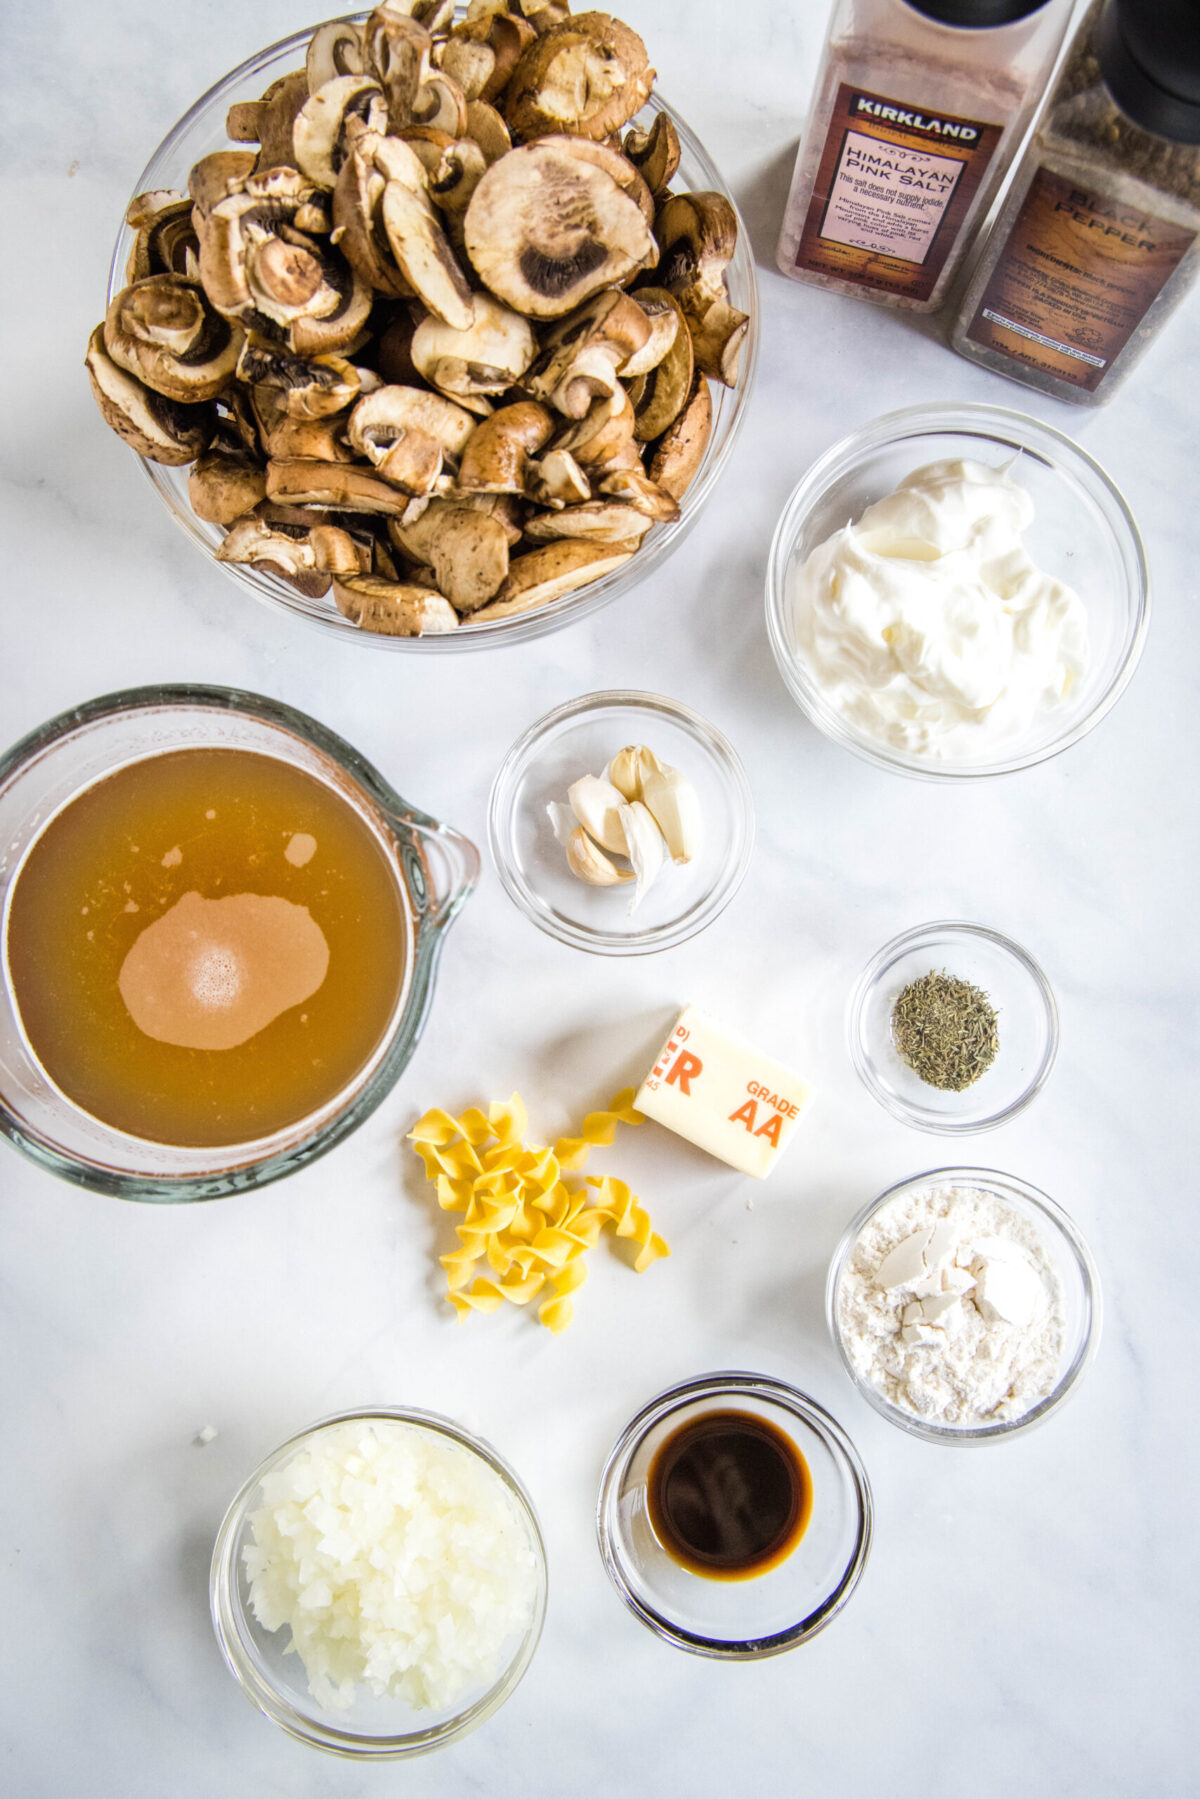 Overhead view of the ingredients needed for mushroom stroganoff: a bowl of sliced mushrooms, a pyrex of broth, a bowl of sour cream, a bowl of garlic, a bowl of flour, a bowl of onions, a bowl of Worcestershire sauce, half a stick of butter, a bowl of thyme, some dried egg noodles, and a salt and pepper grinder